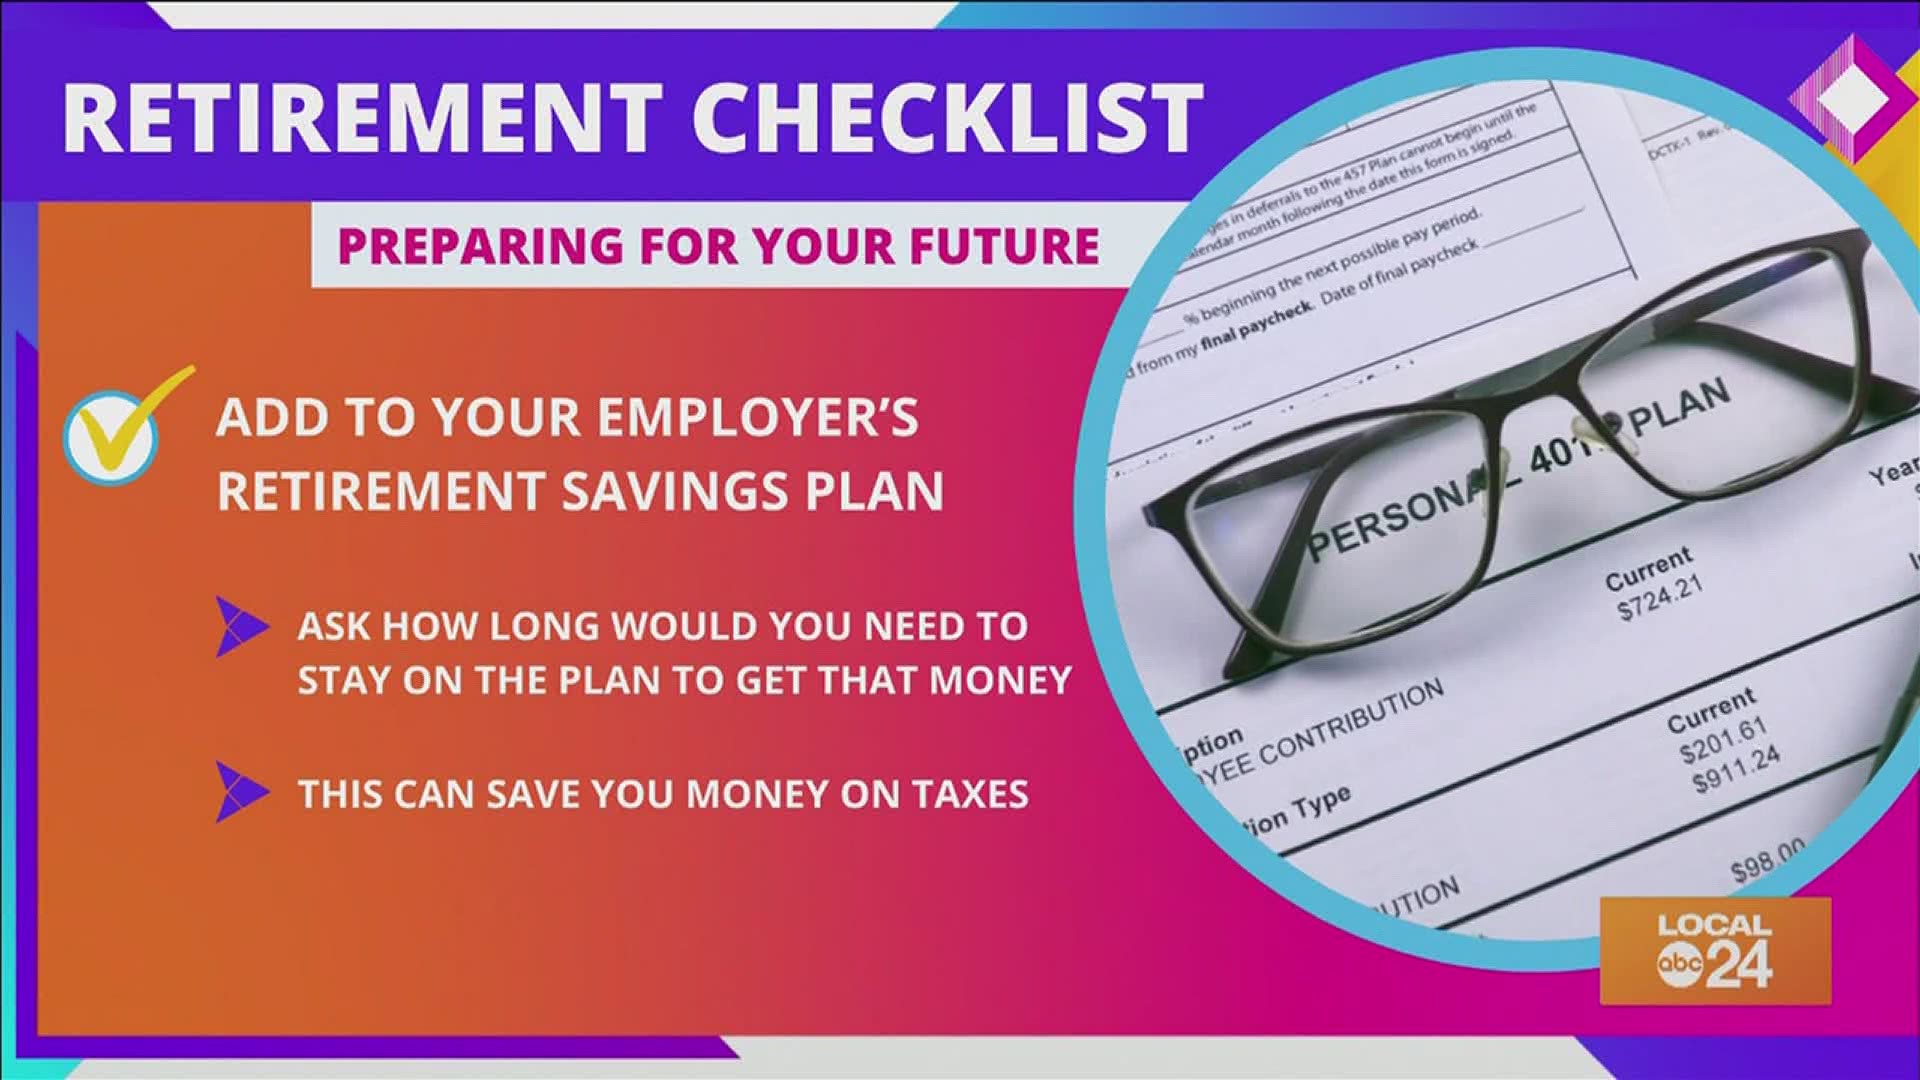 Whether you've just started a job or you've been working for awhile, there's no time like the present to learn these 5 ways to save for retirement on "The Shortcut!"